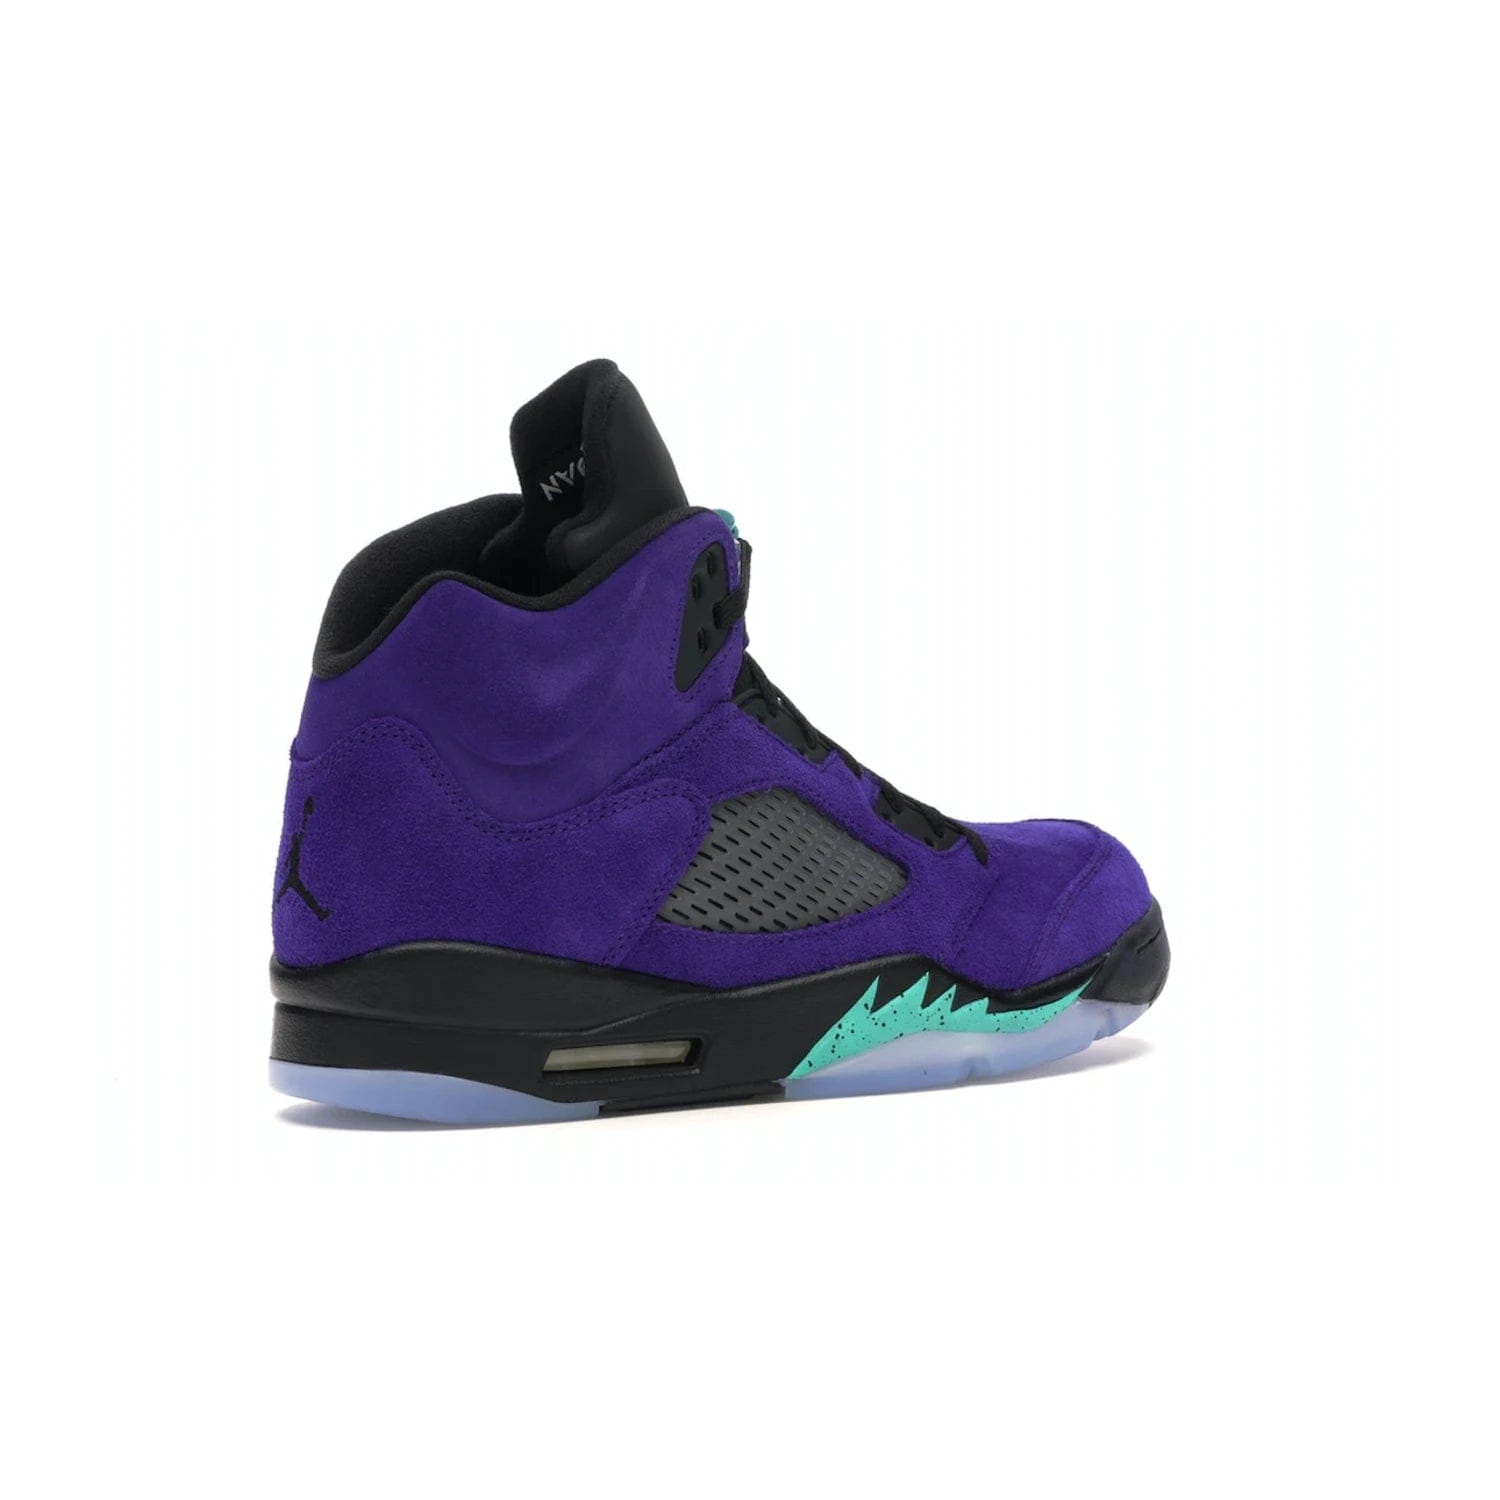 Jordan 5 Retro Alternate Grape - Image 33 - Only at www.BallersClubKickz.com - Bring the classic Jordan 5 Retro Alternate Grape to your sneaker collection! Featuring a purple suede upper, charcoal underlays, green detailing, and an icy and green outsole. Releasing for the first time since 1990, don't miss this chance to add a piece of sneaker history to your collection.